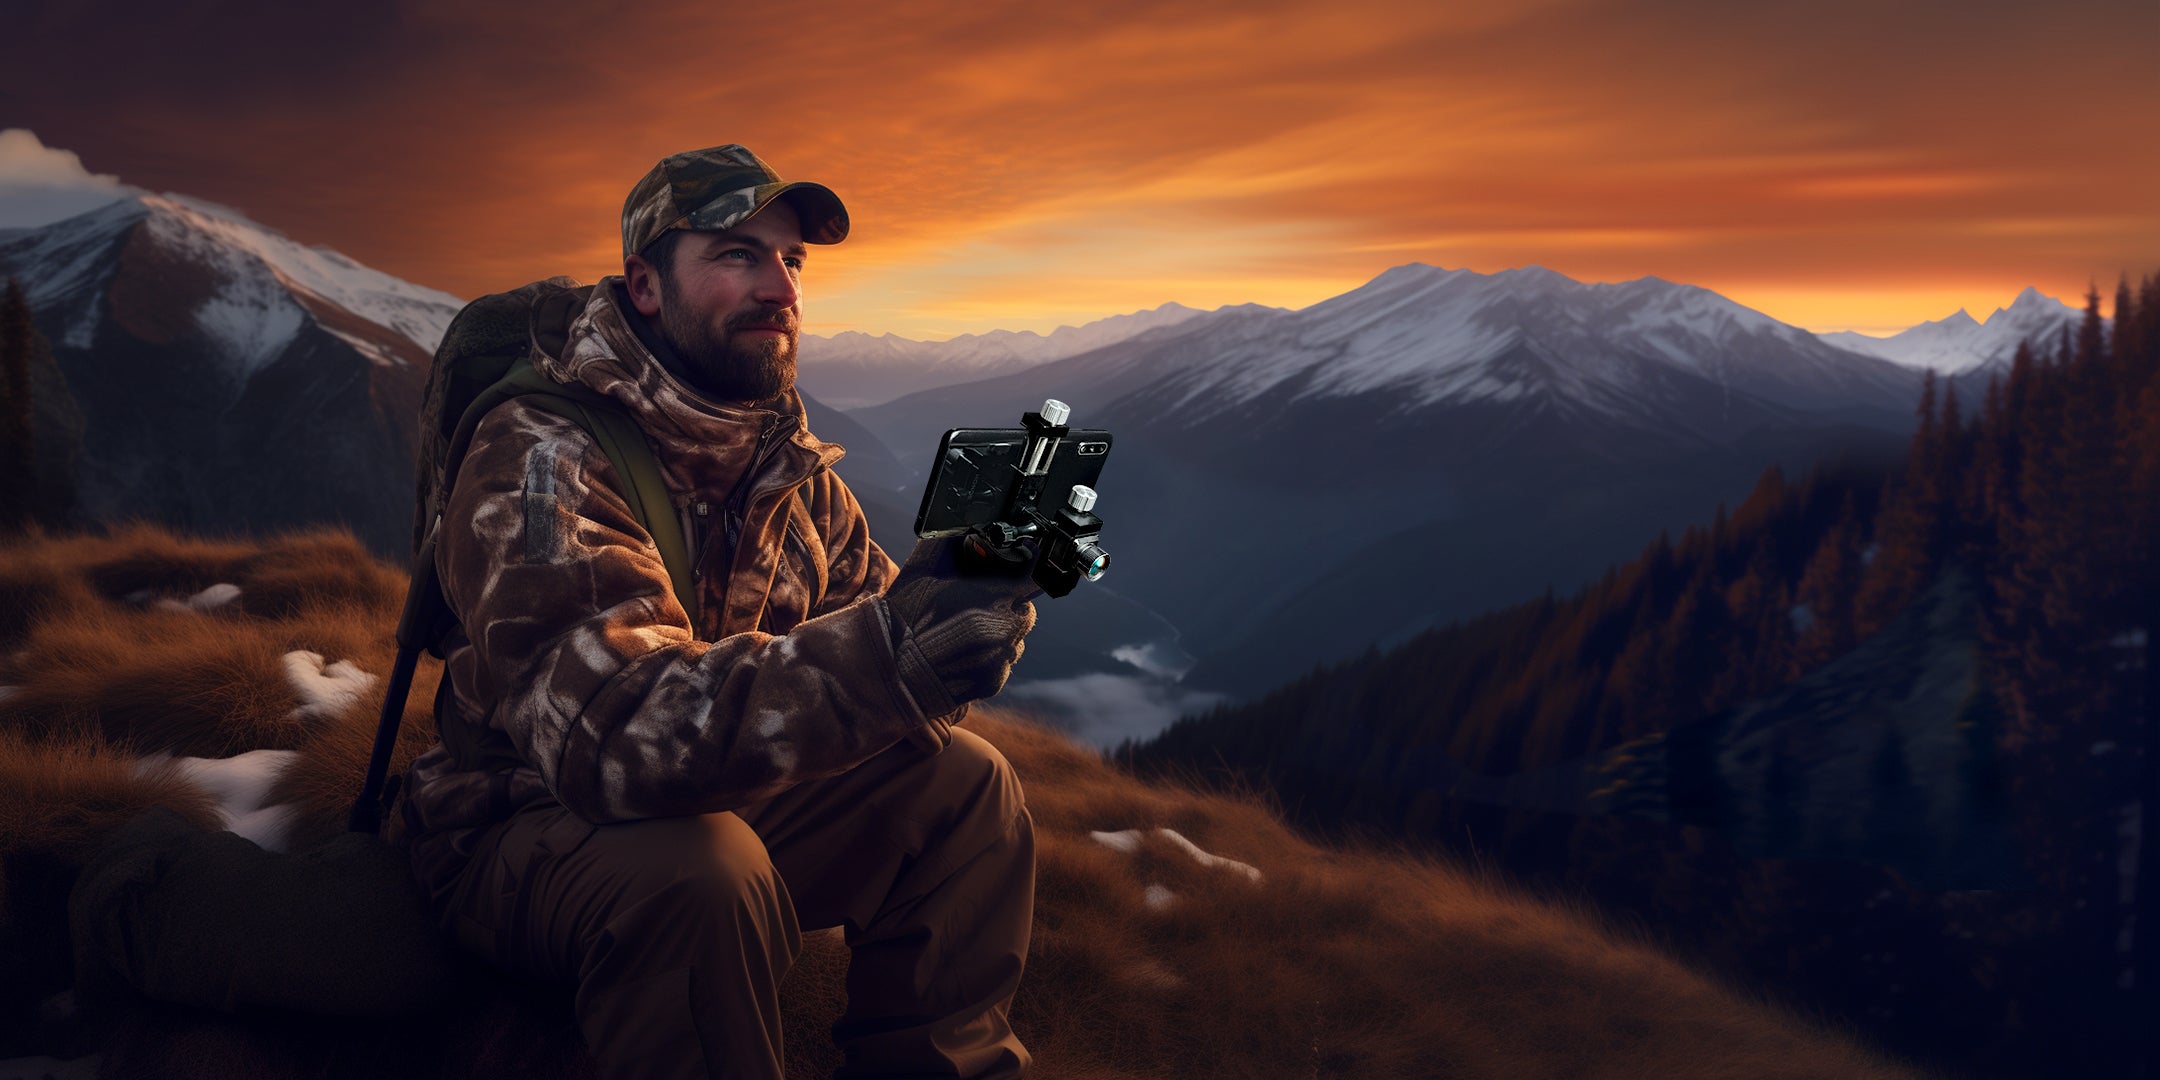 Thermal Monocular For outdoor hunting, exploring and survival